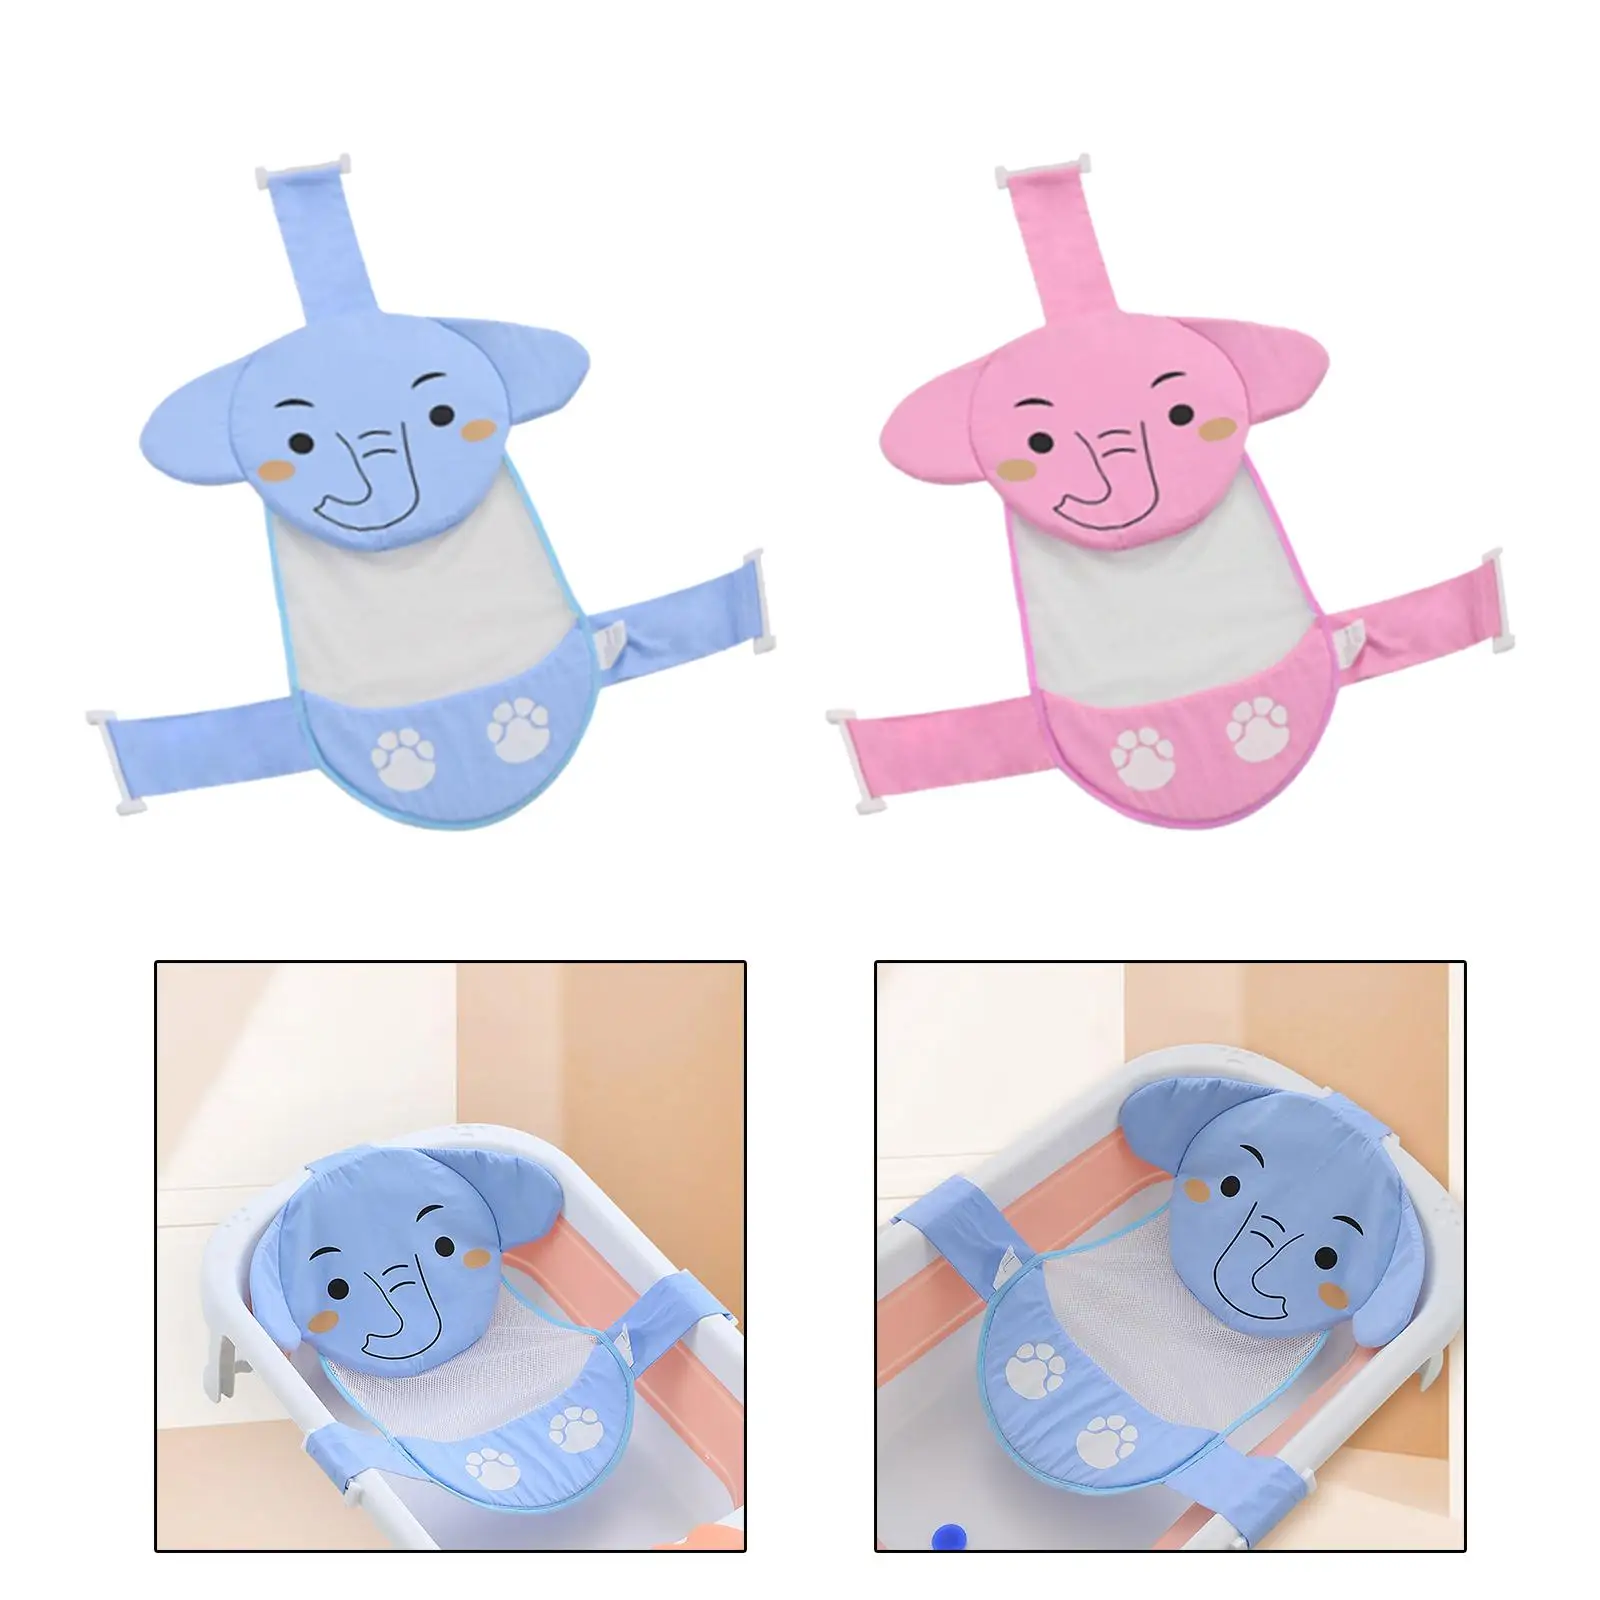 Cute Elephant Baby Bath Pad Foldable Nonslip Infant Bath Supporter Net Floating Bathing Tub Seat Baby Shower Mat for Baby Infant